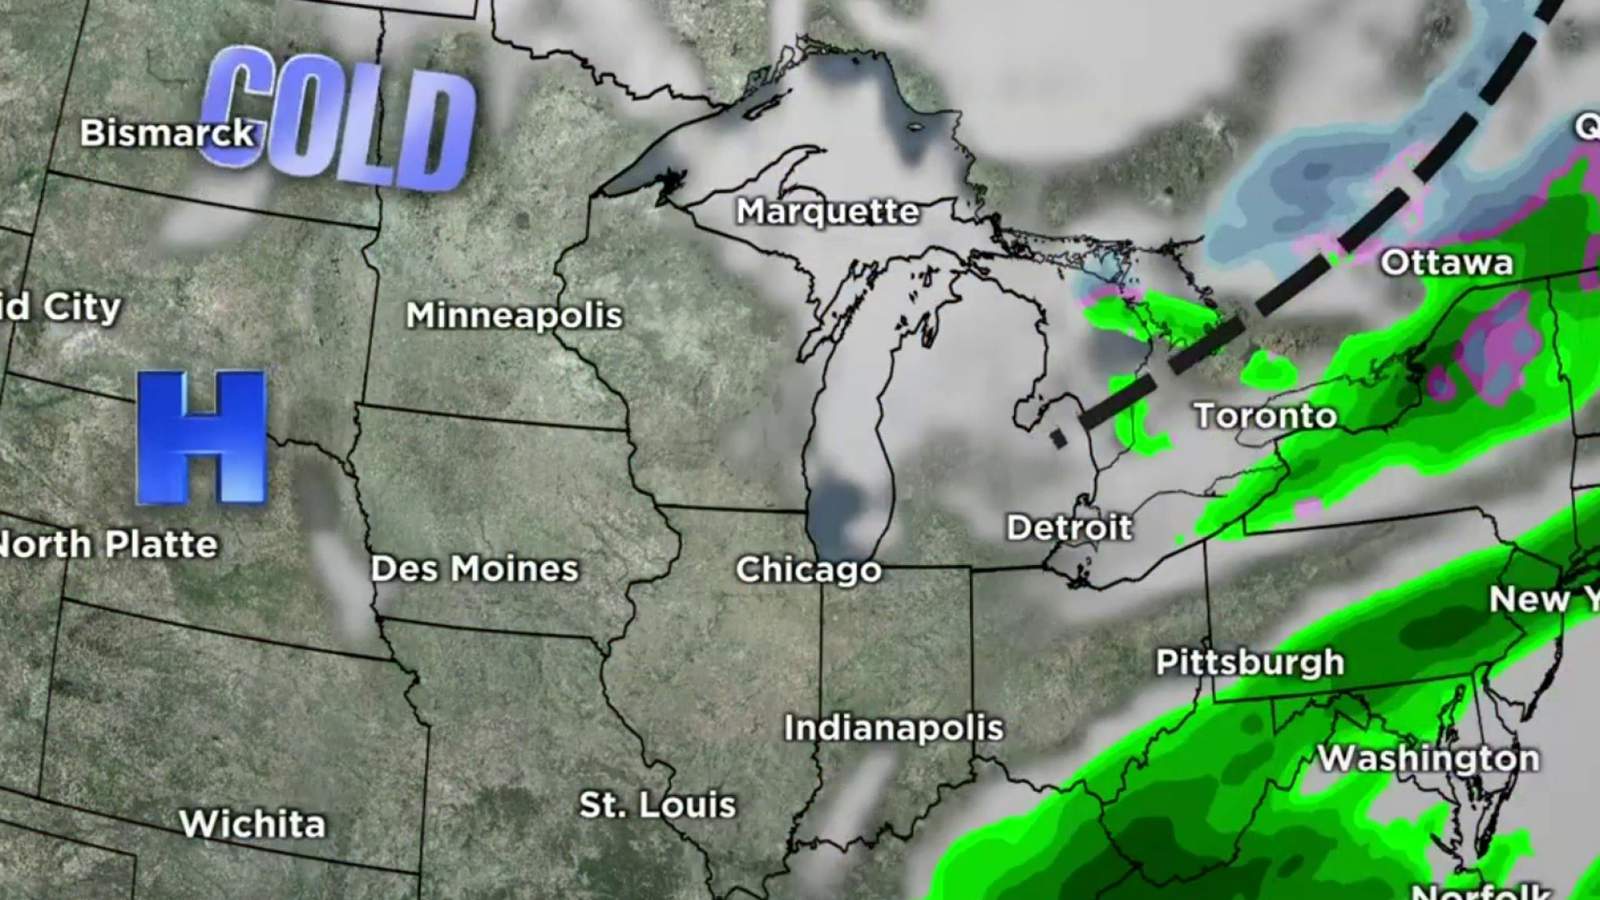 Metro Detroit weather: Skies clear gradually, but expect a cold Friday night